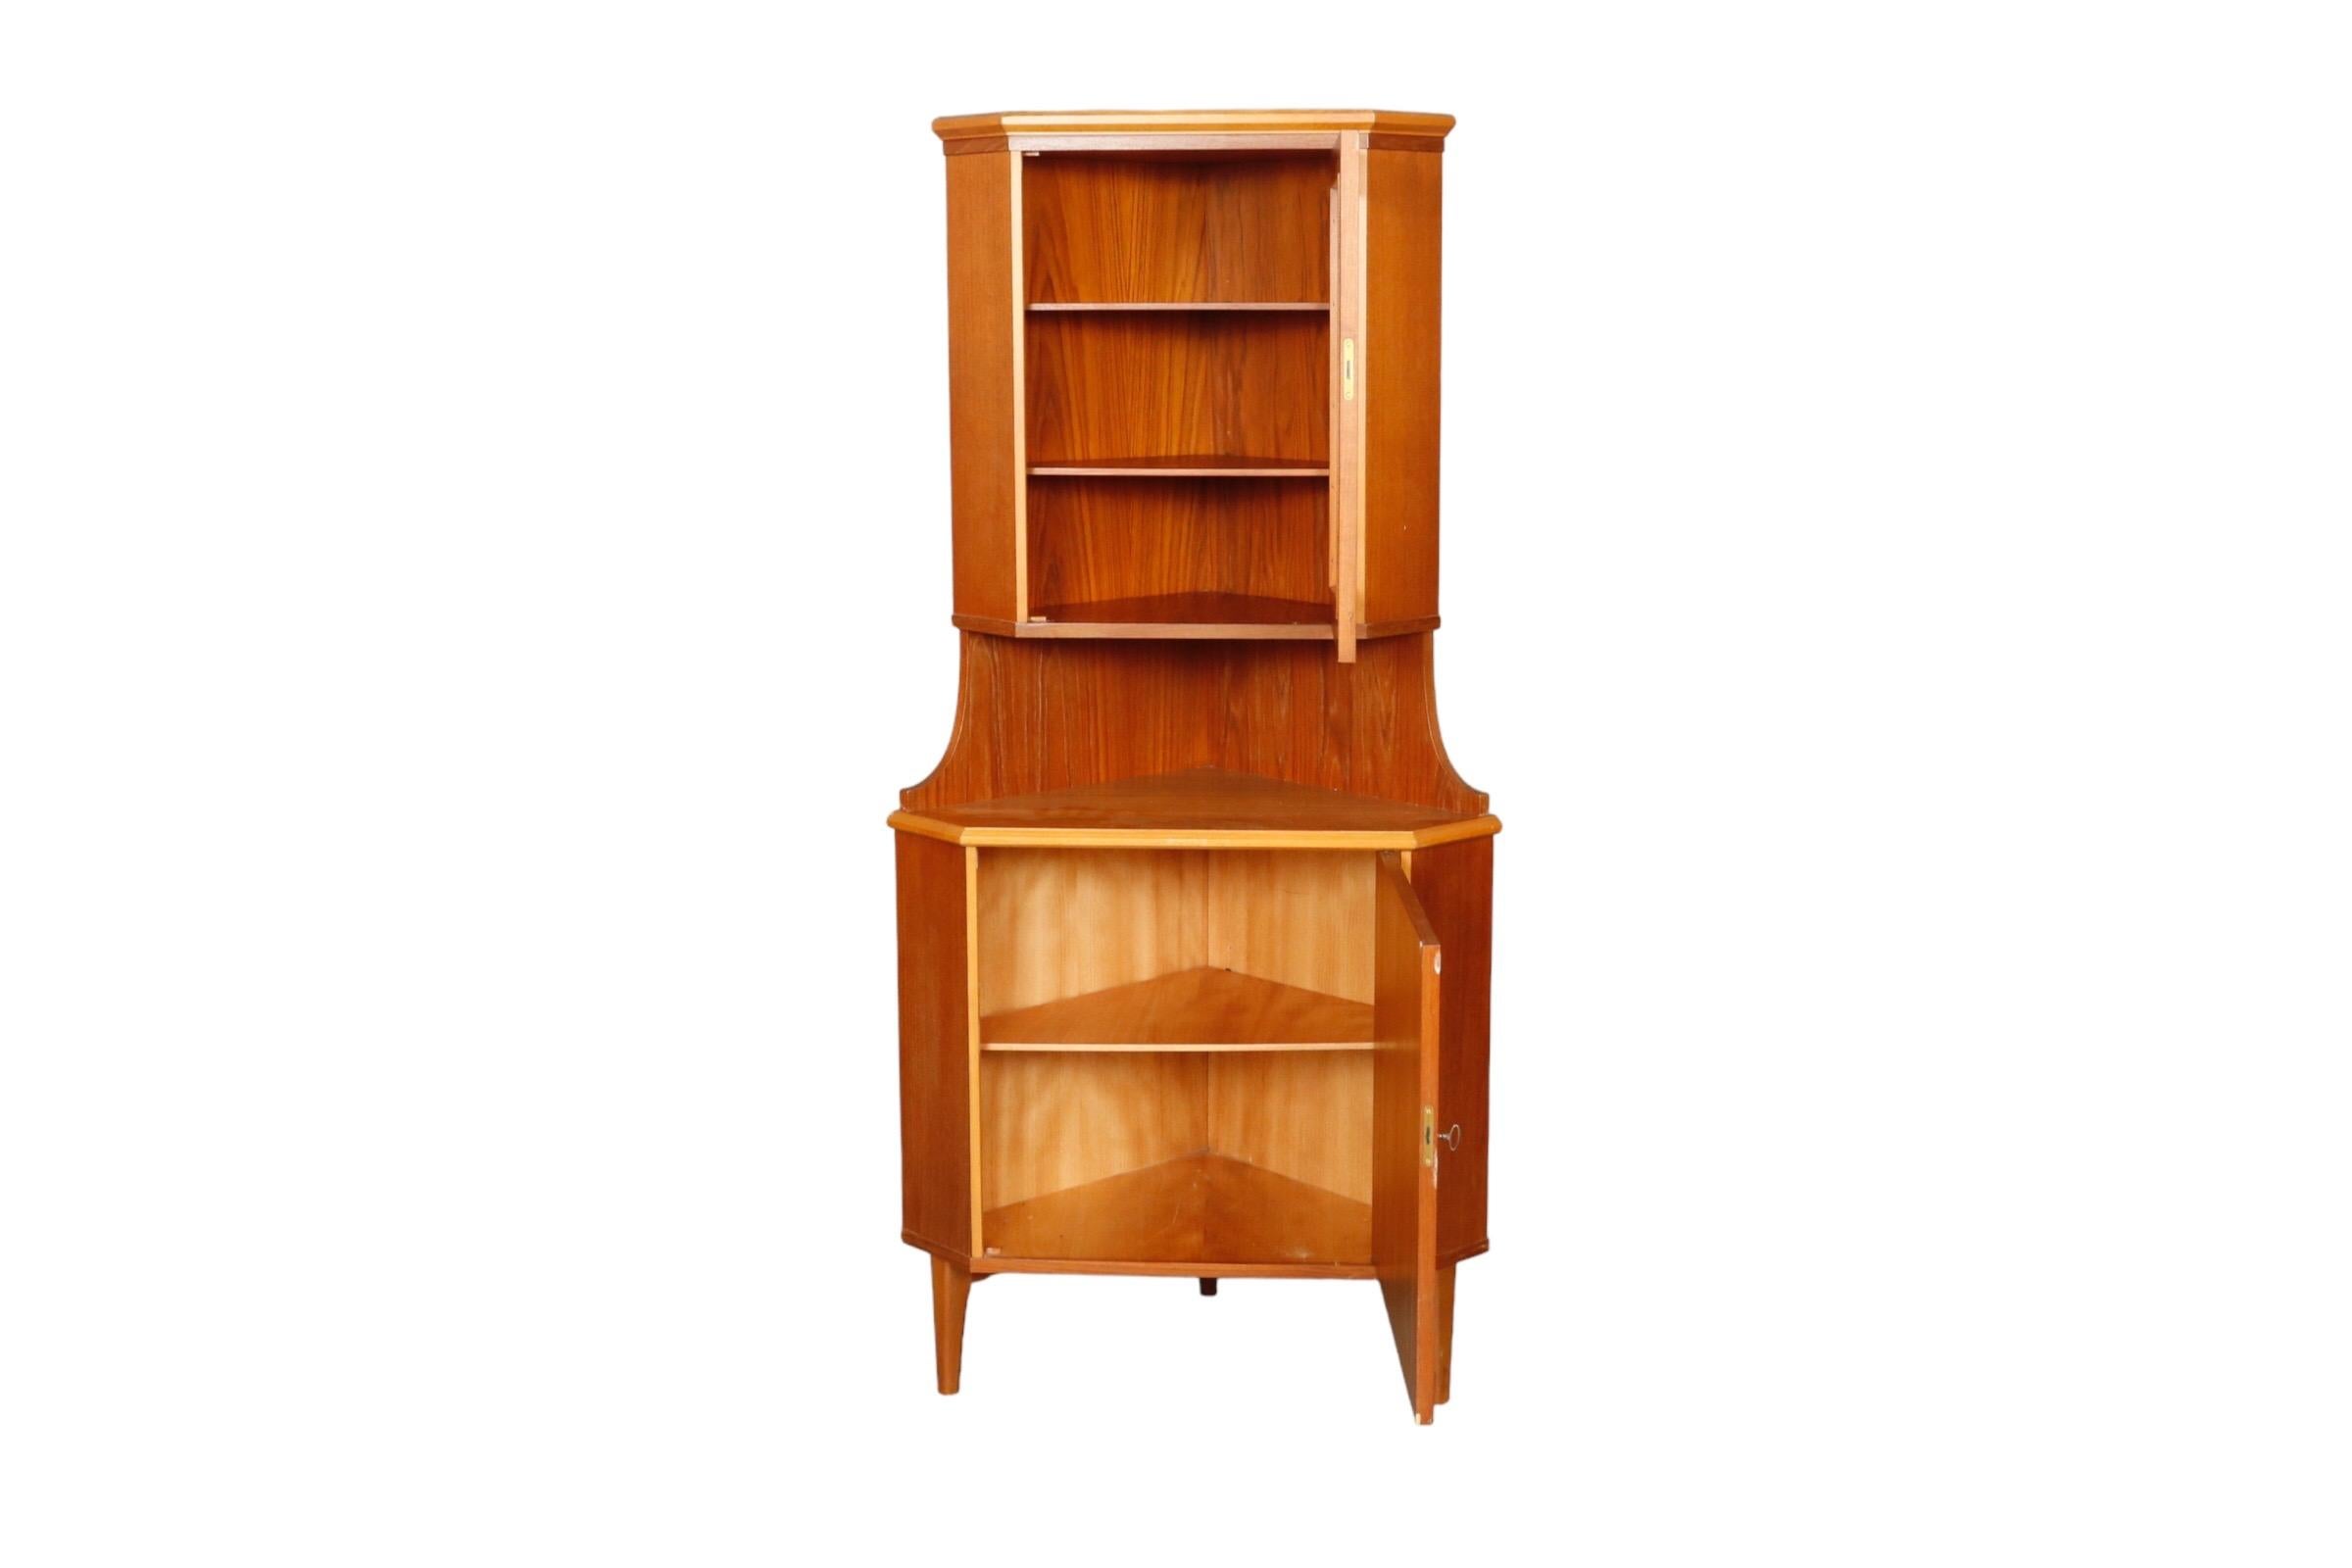 A 1970’s Danish corner cupboard with locking cabinets. The upper cabinet door has a glass panel decorated with a cartouche pattern. Inside are housed two shelves. The cabinet below houses a single shelf.

H:67.75” 
W:31.5” 
D:17.75”